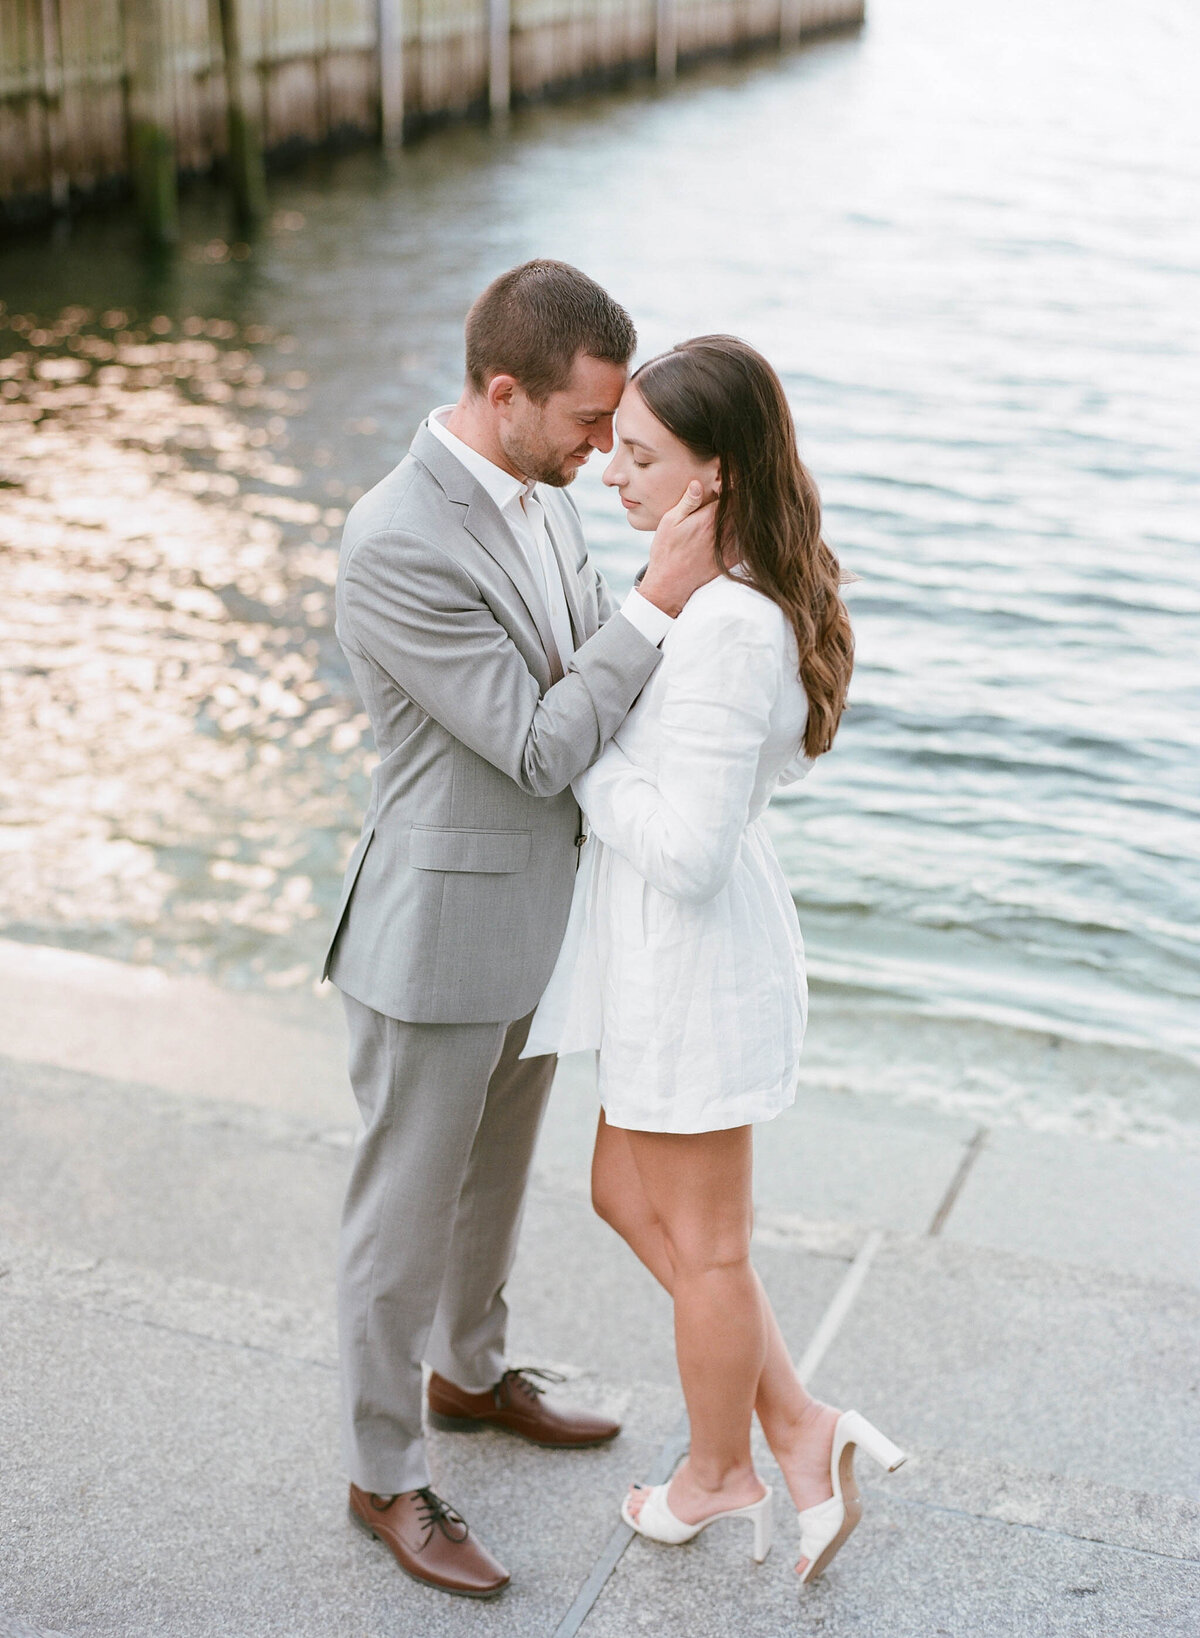 Jacqueline Anne Photography - Halifax Wedding Photographer - Downtown Engagement - Adam and Nicole-49